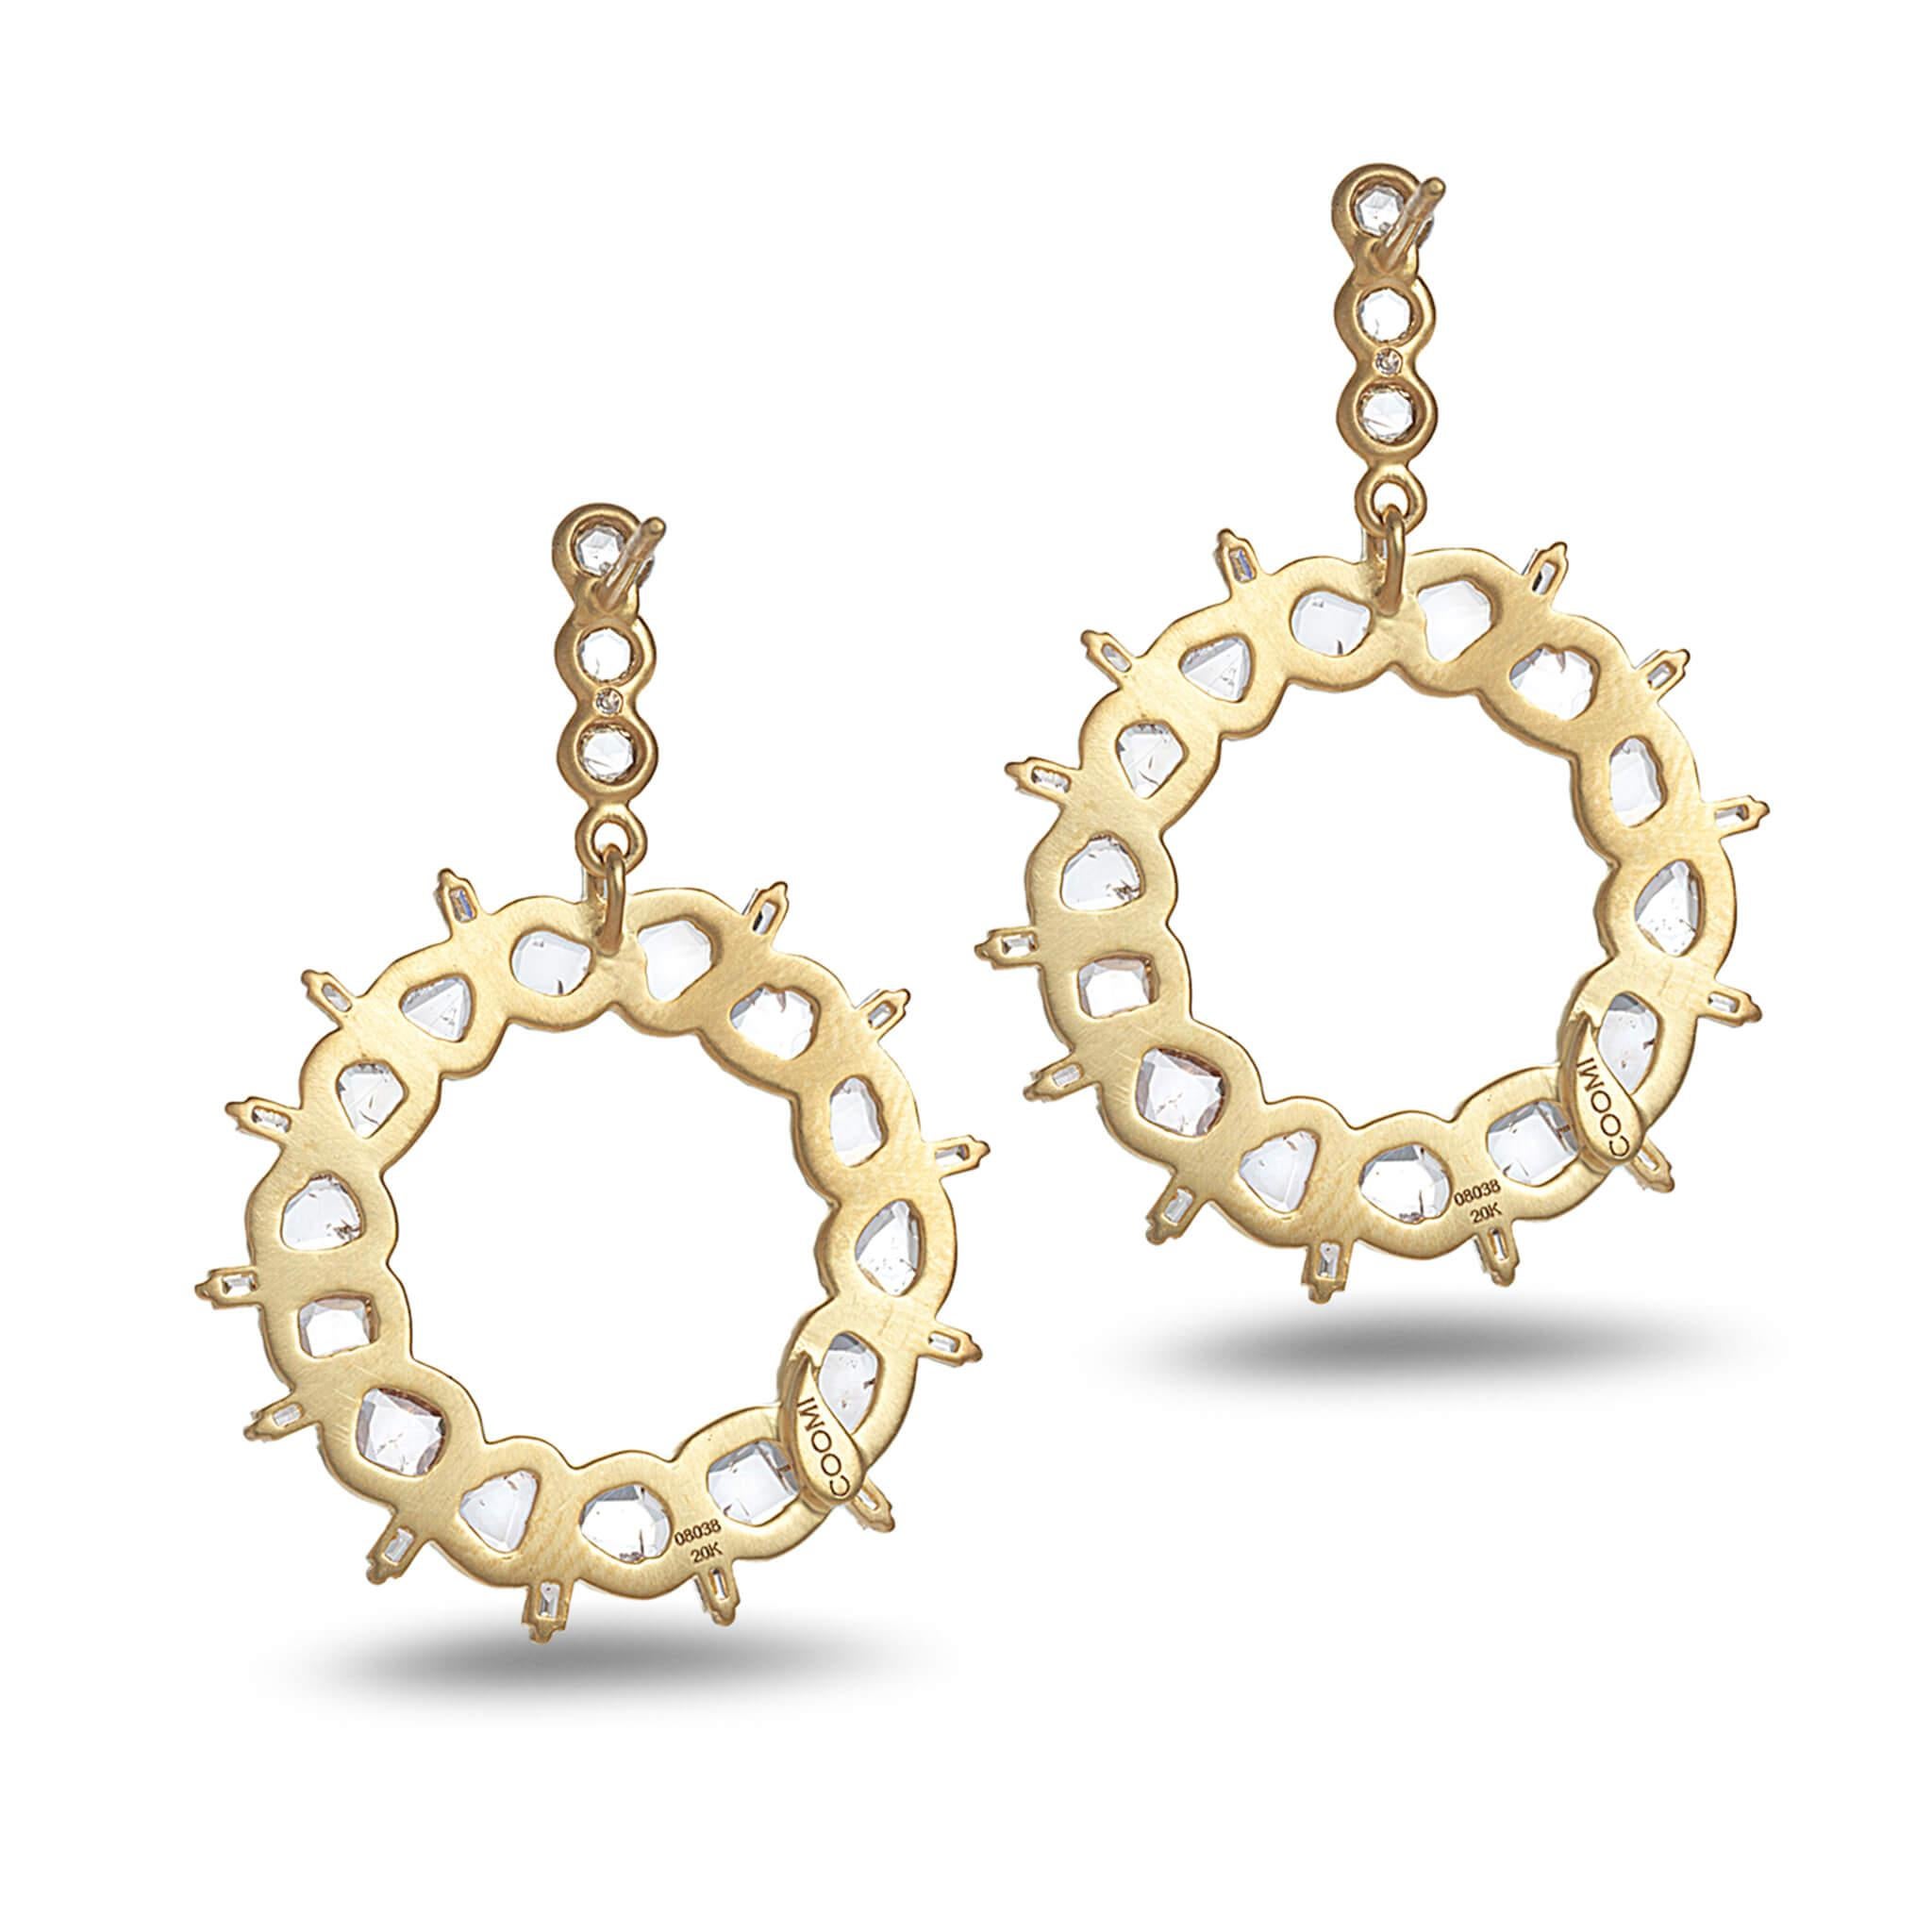 Coomi Luminosity front facing hoop earrings set in 20K yellow gold with 2.90cts diamonds.

Coomi’s Luminosity Collection consists of bold design and reflects light from within. Each uniquely natural rose cut diamond and diamond slice are chosen by